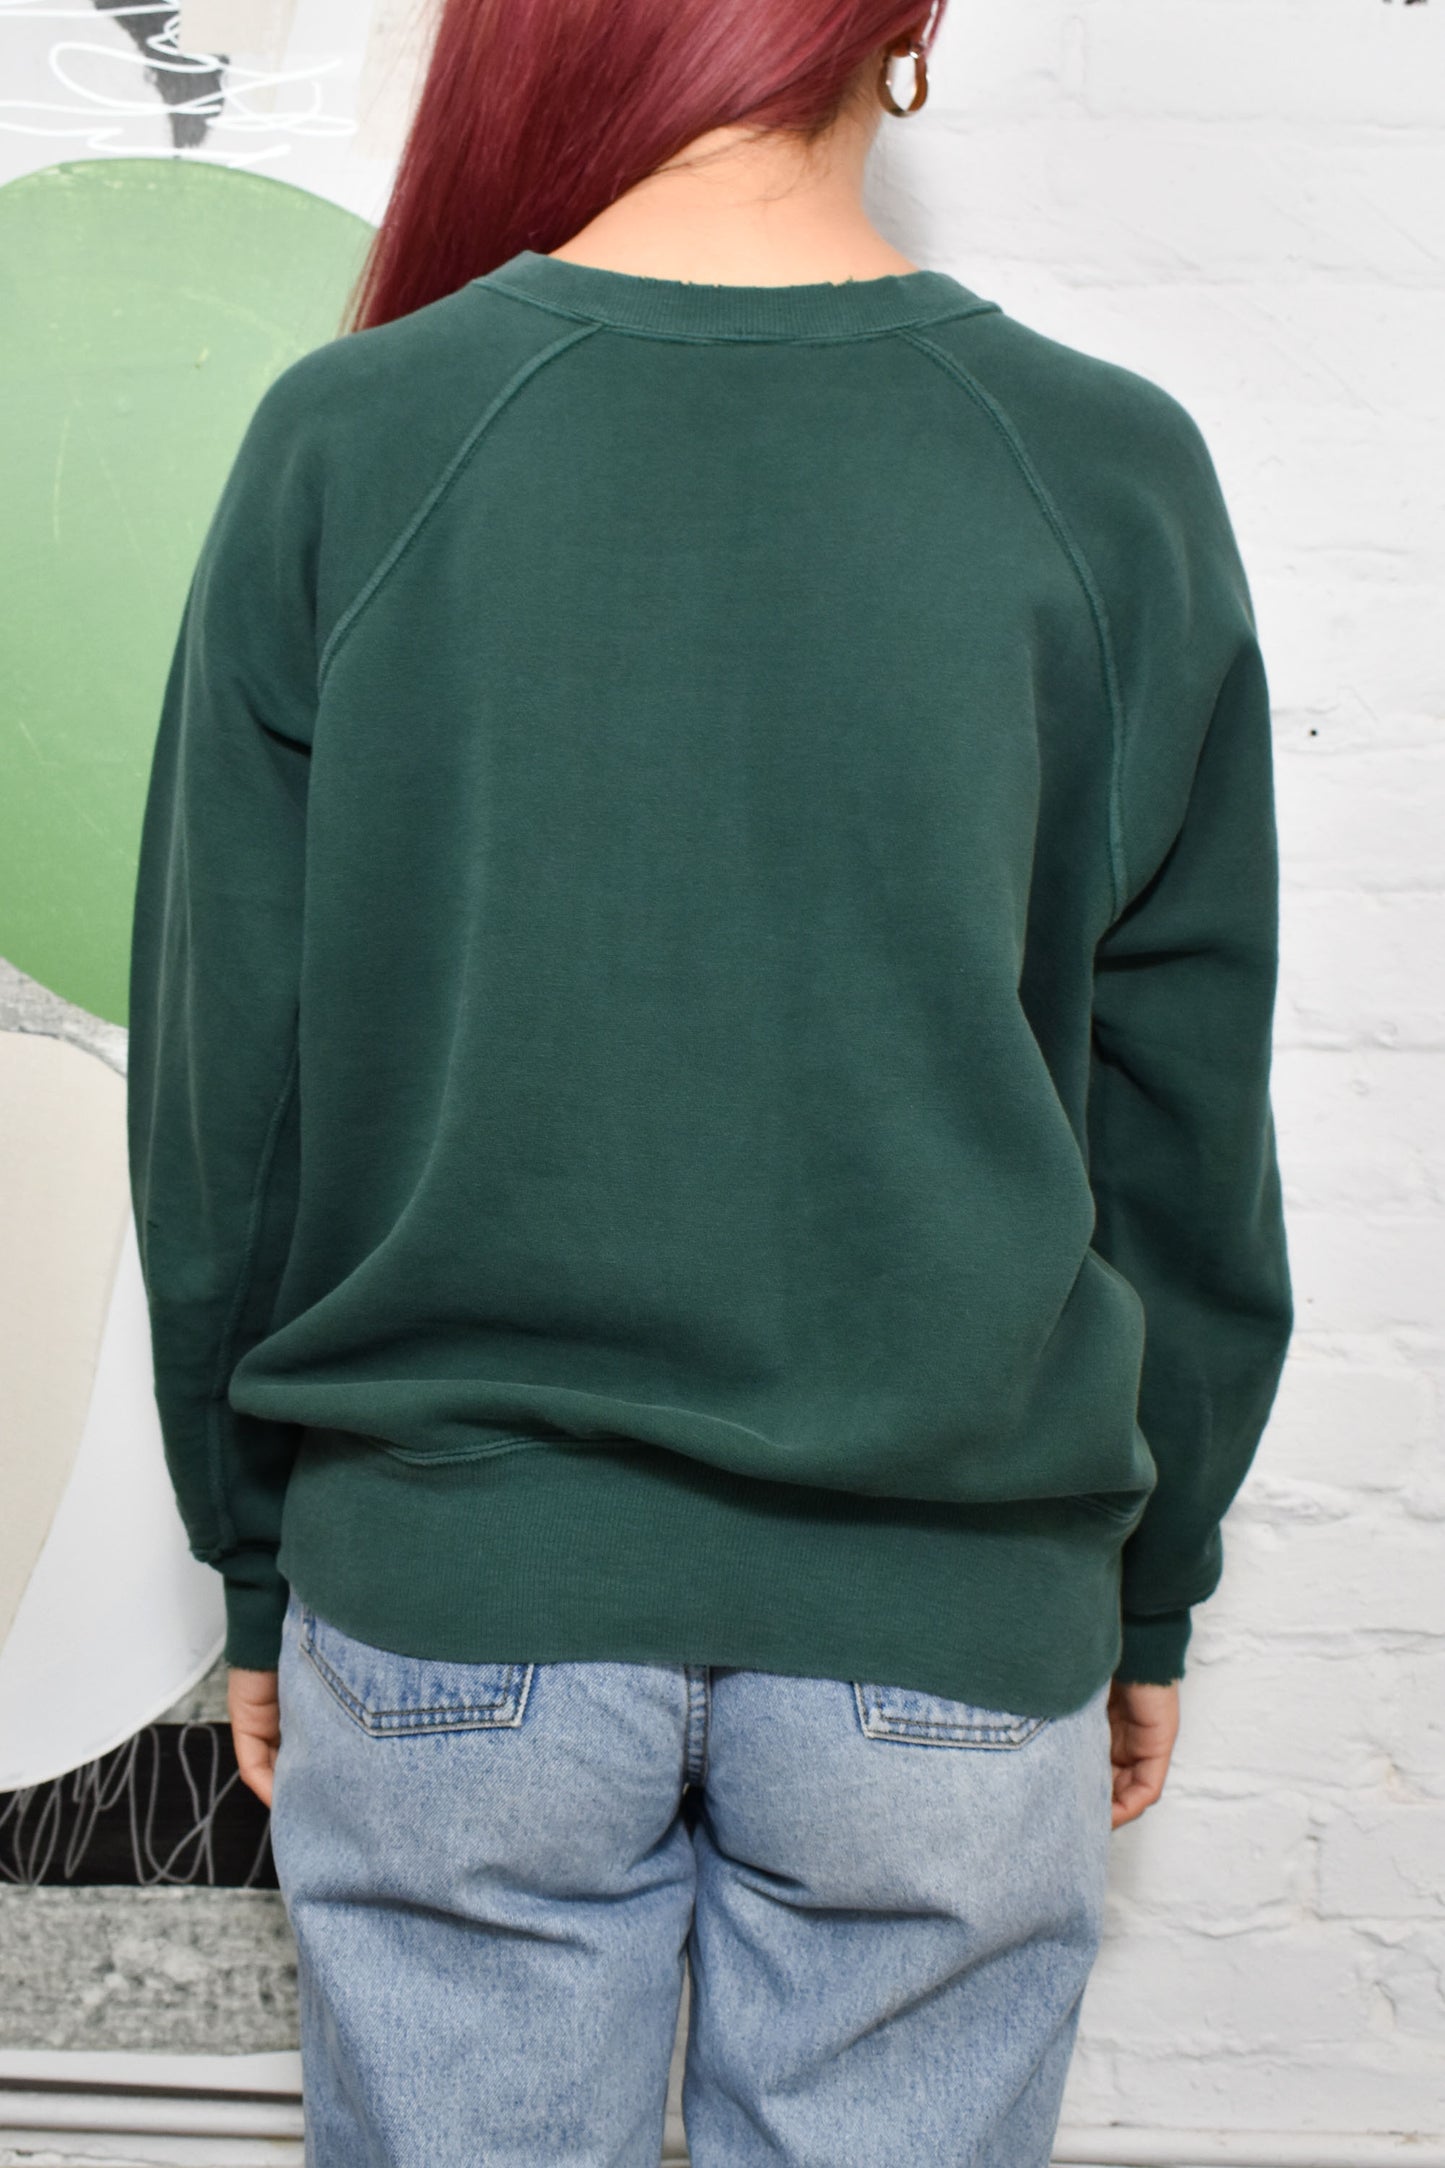 Vintage 50's/60's "Penney's" Forest Green Sweatshirt